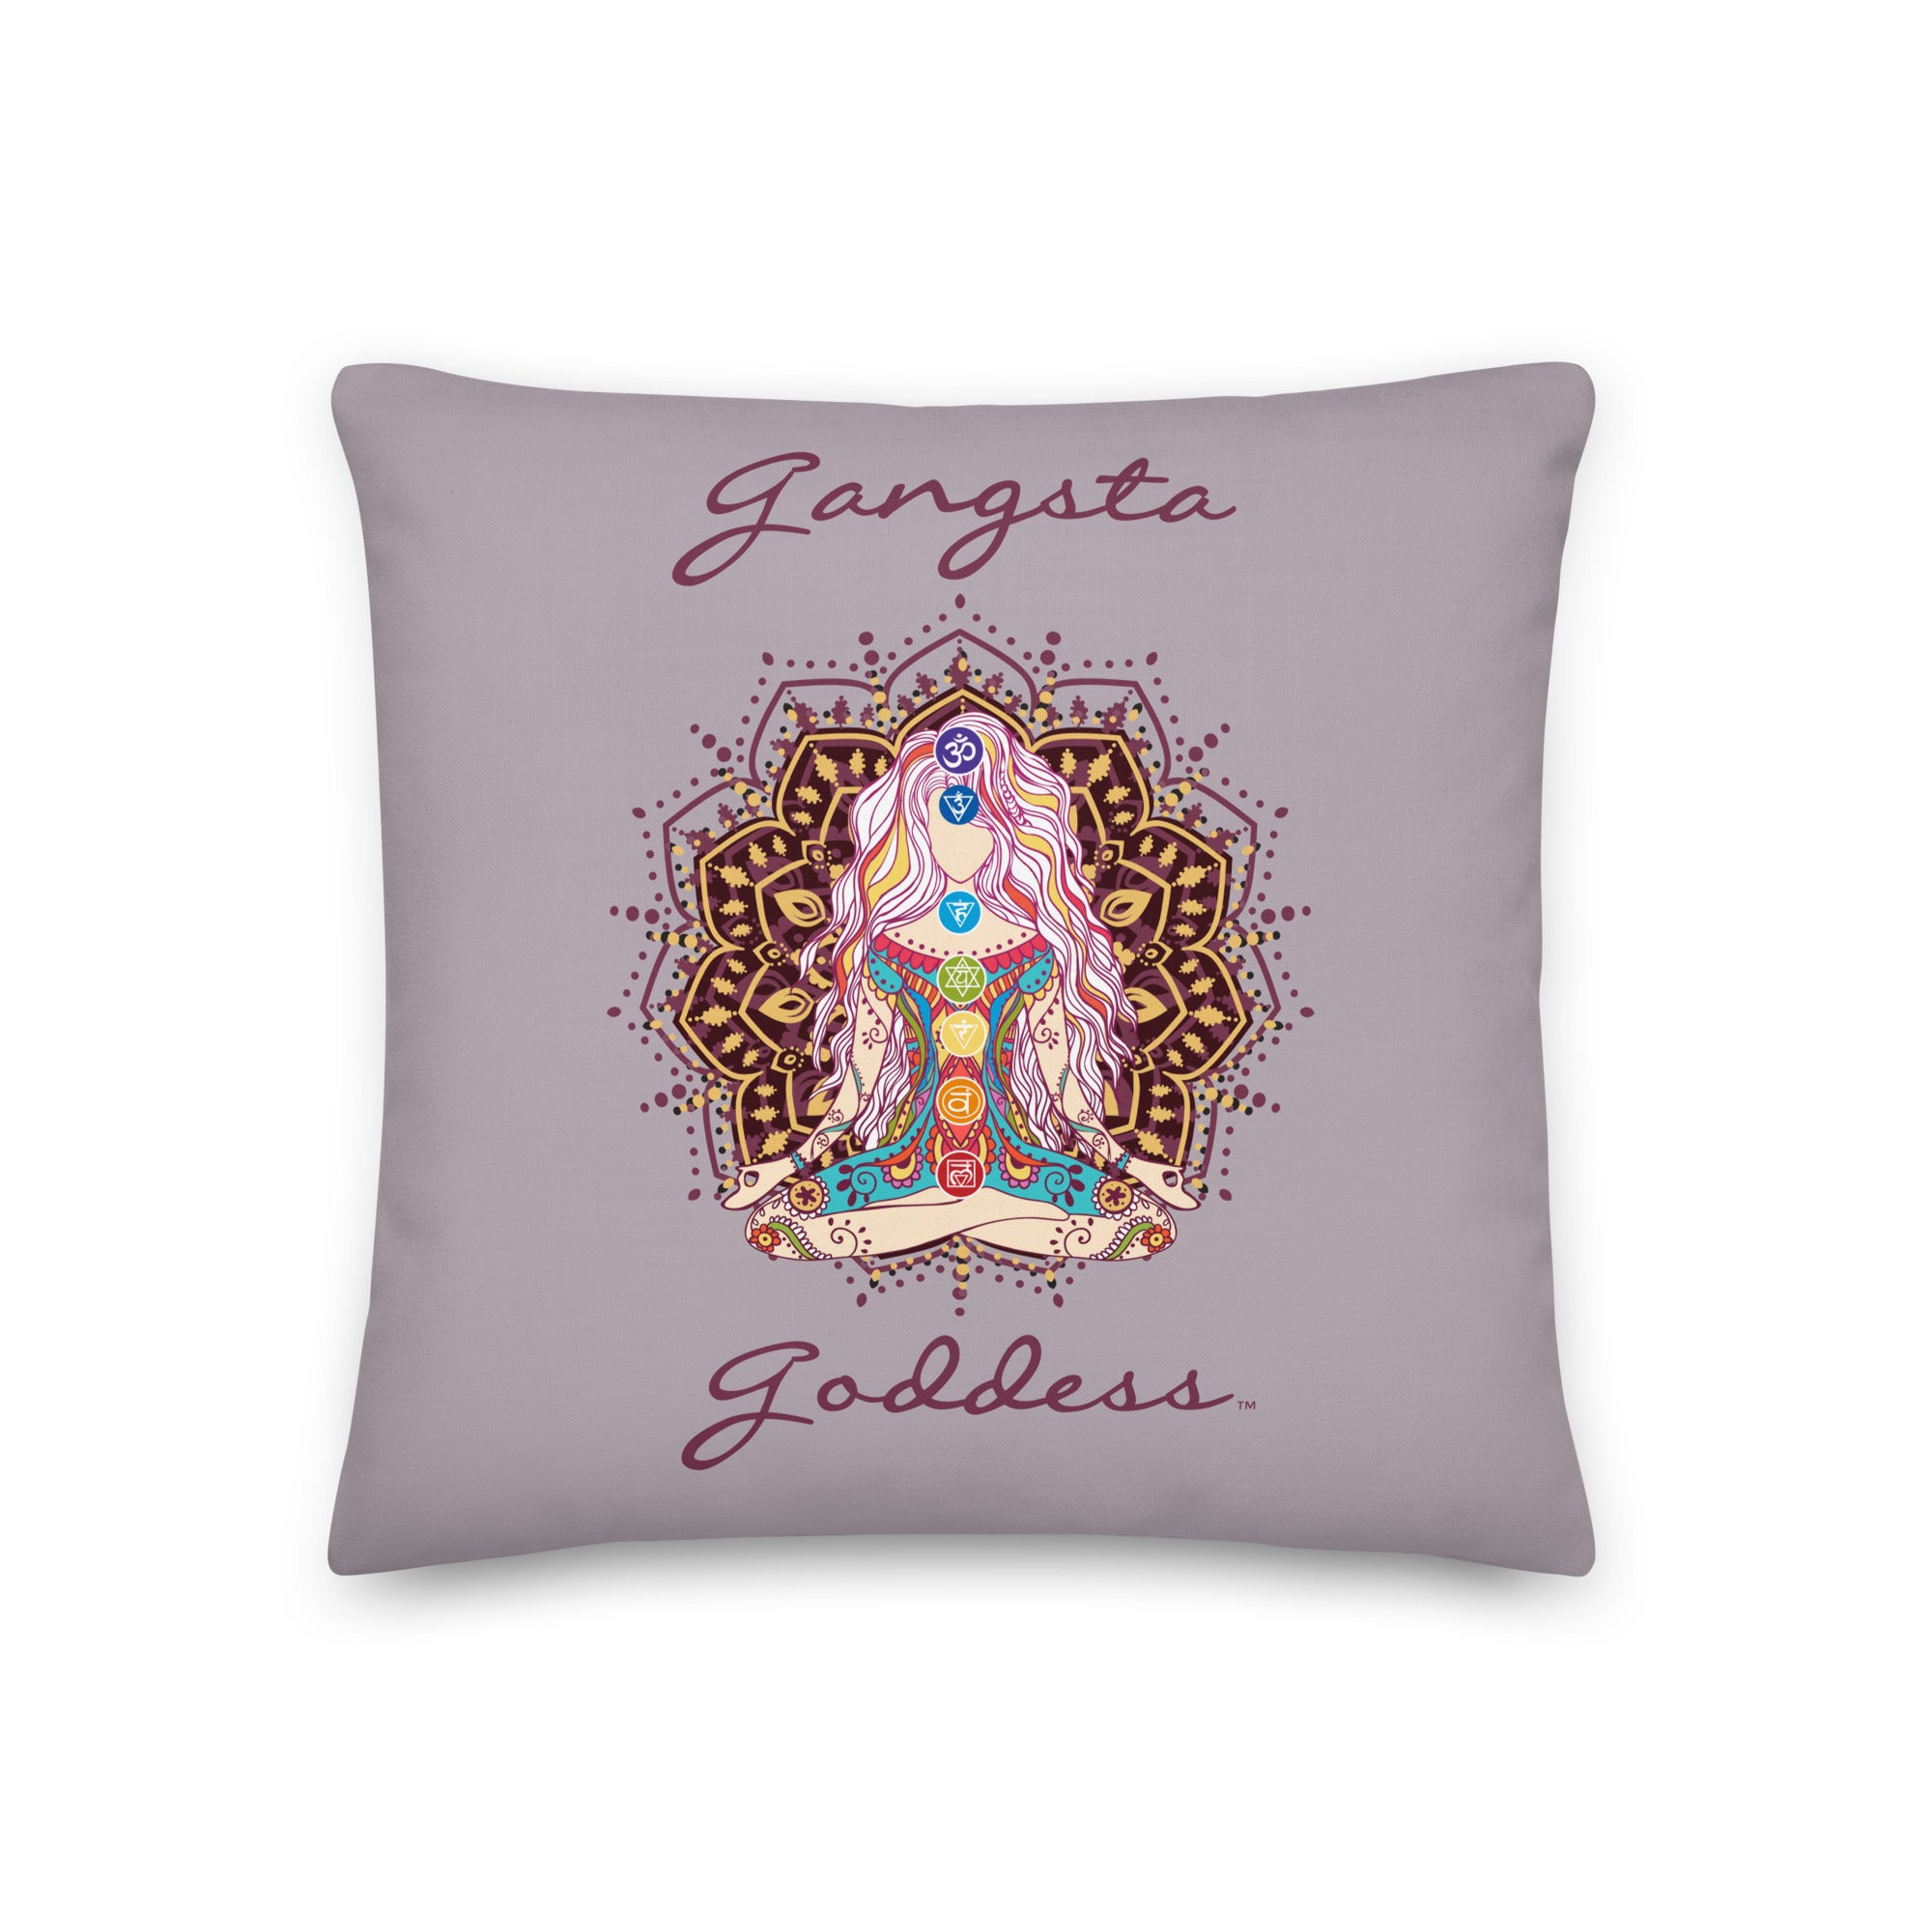 gangsta goddess 18x18 throw pillow by goddess swag.  double sided with lily color background. Image is a design of a goddess in yoga lotus position, mandala behind her, 7 chakras up her center. Gangsta is written above image and goddess is written below image. 